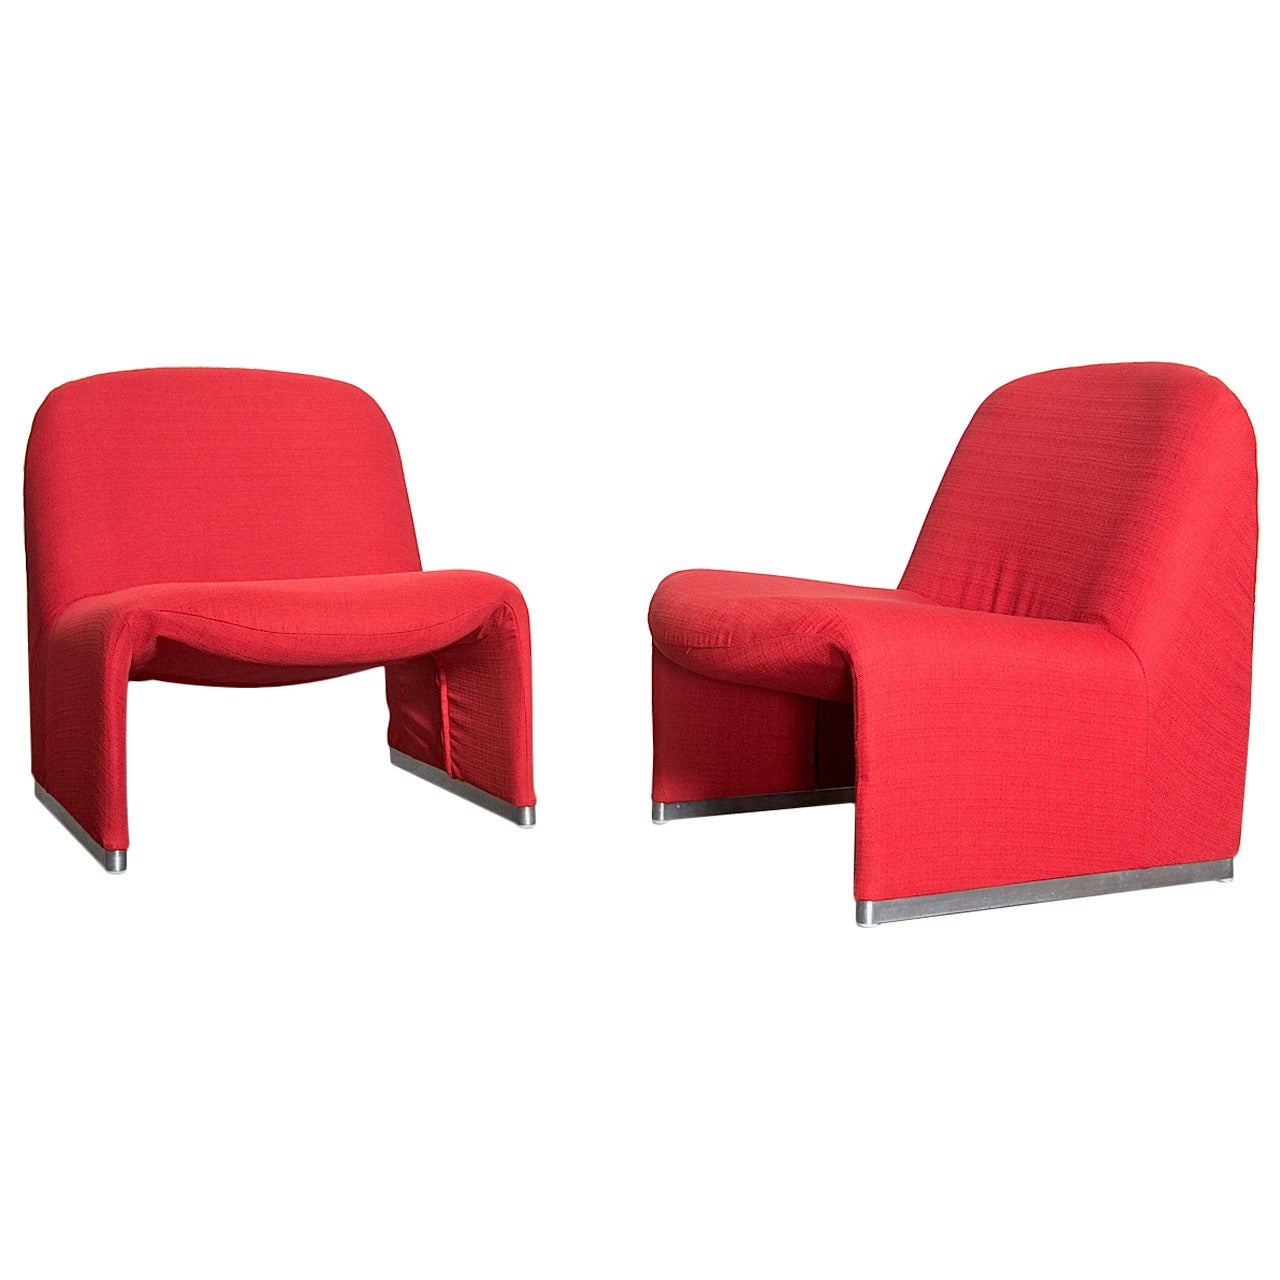 Pair of Red Piretti Alky Lounge Chairs for Castelli